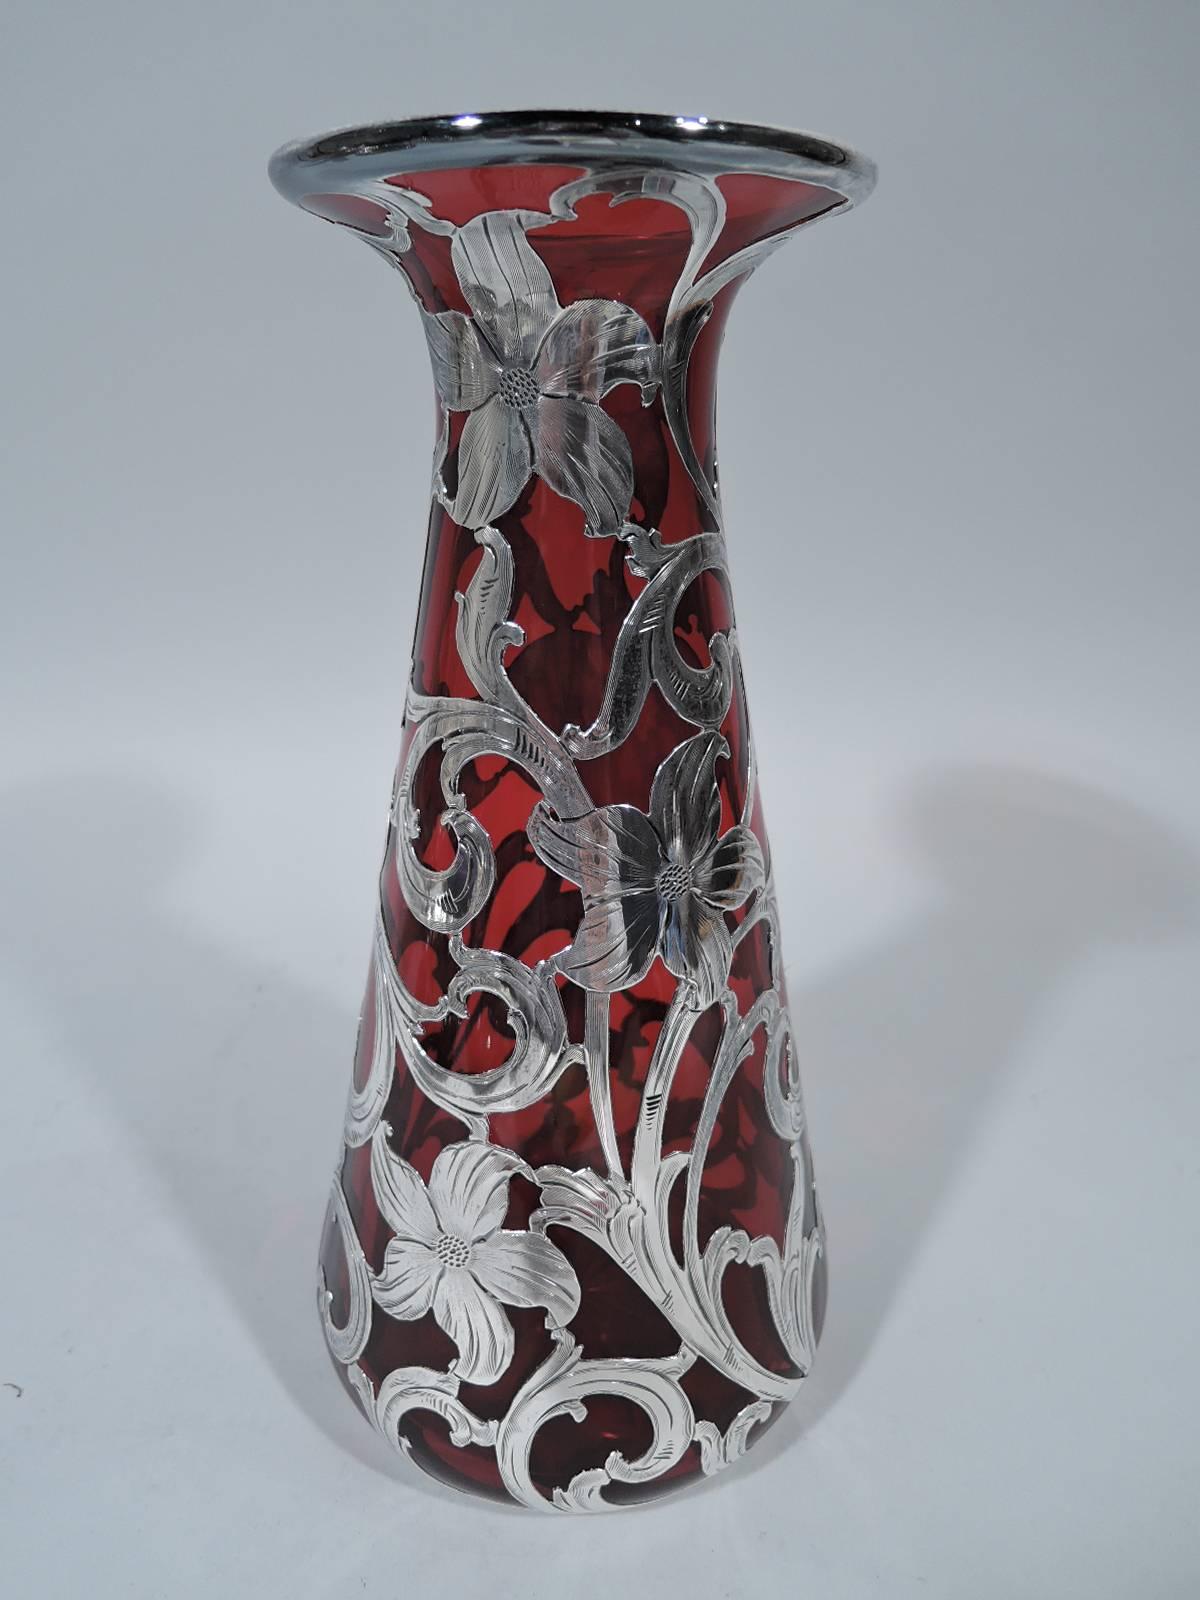 Art Nouveau glass vase with silver overlay. Made by Alvin in Providence, ca 1910. Conical with narrow mouth and flared rim. Silver scrolls and blossoms as well as asymmetrical cartouche with engraved script monogram. Lush flora on deep ruby red